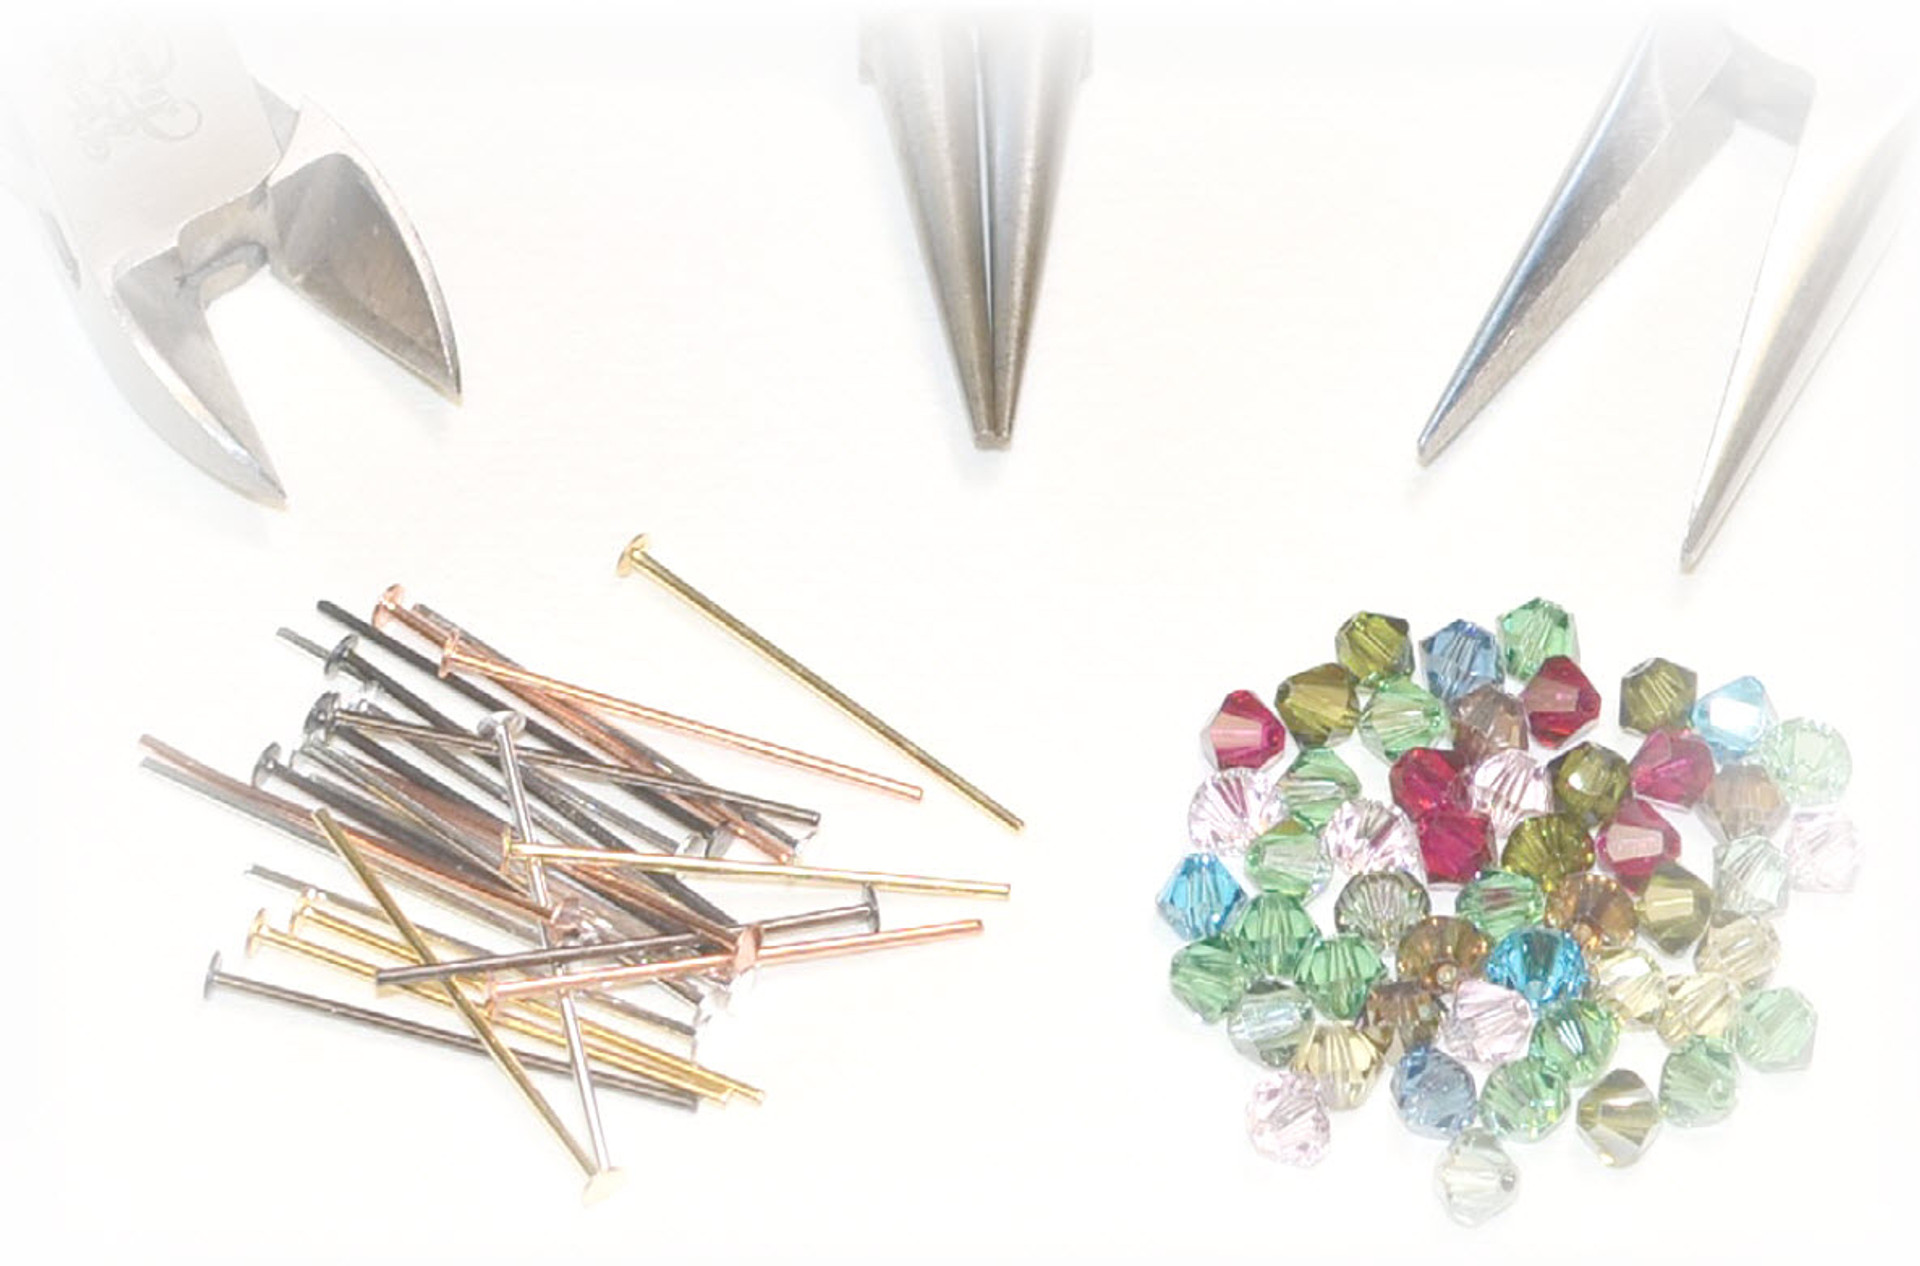 Rings & Things: Jewelry Making Supplies, Findings, and Beads